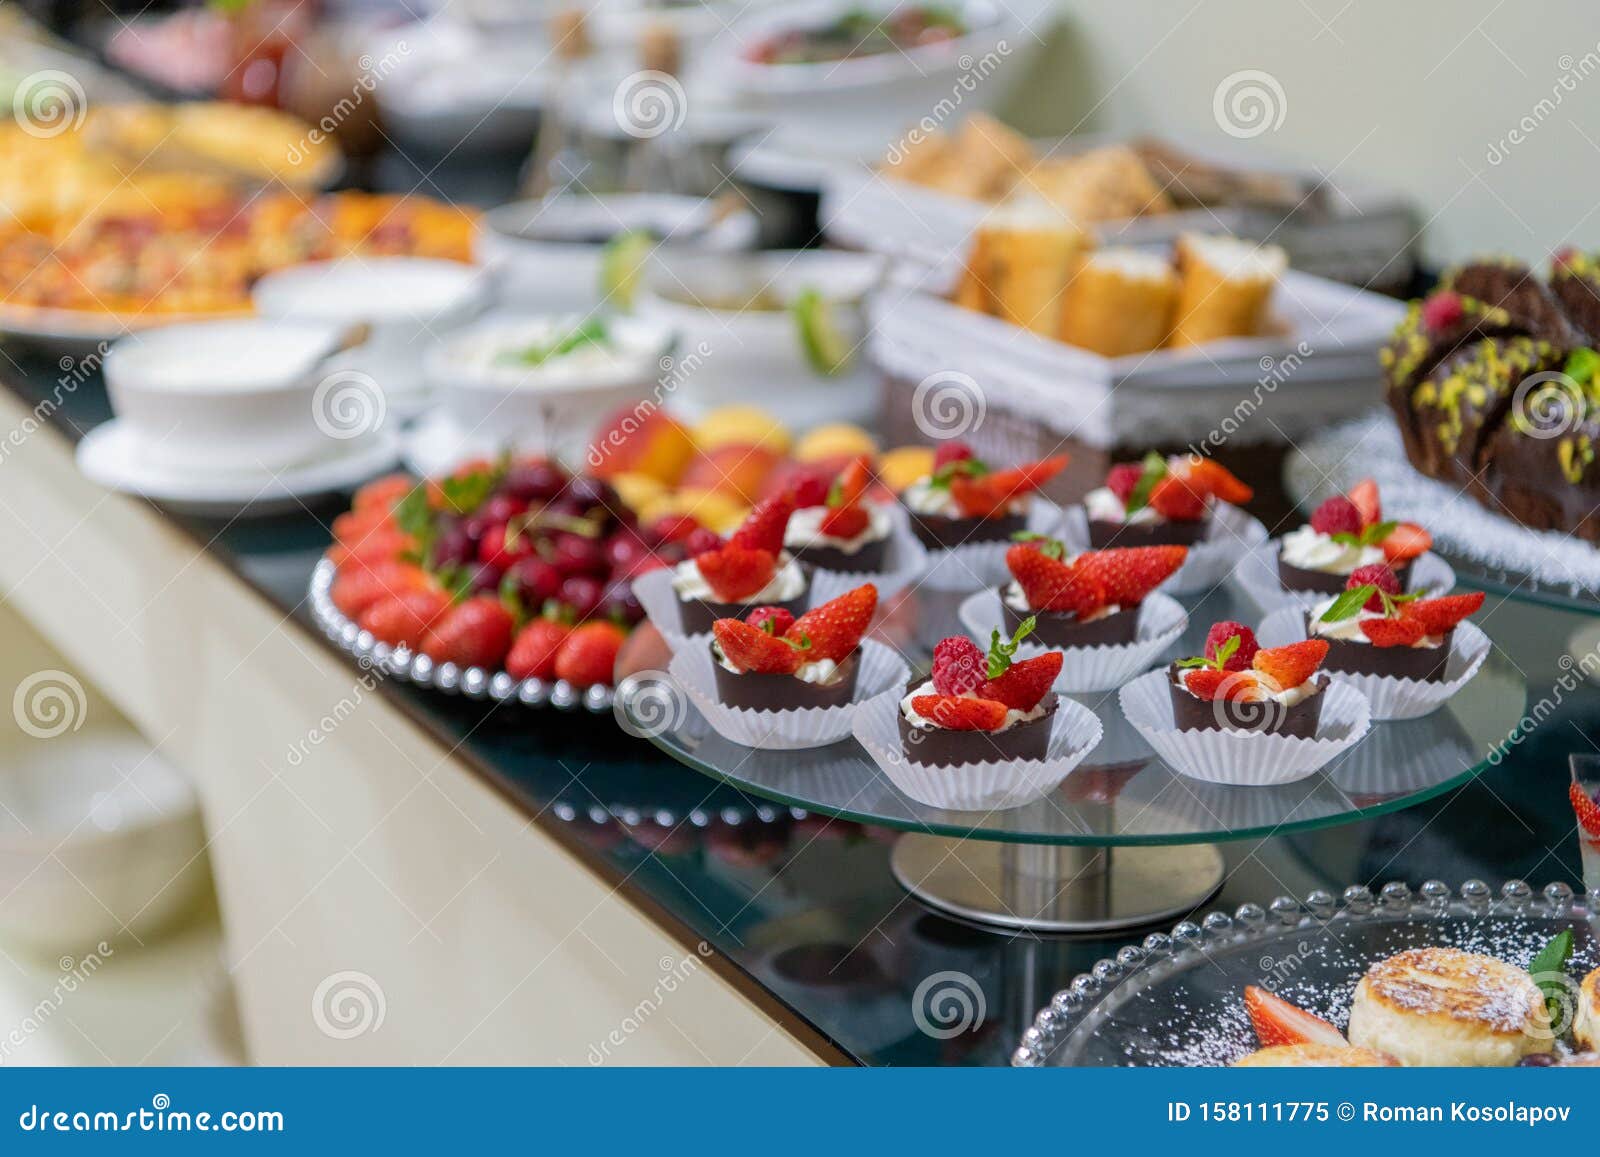 A Tasty Sweet Dessert with Creme and Strawberries on a Breakfast Buffet